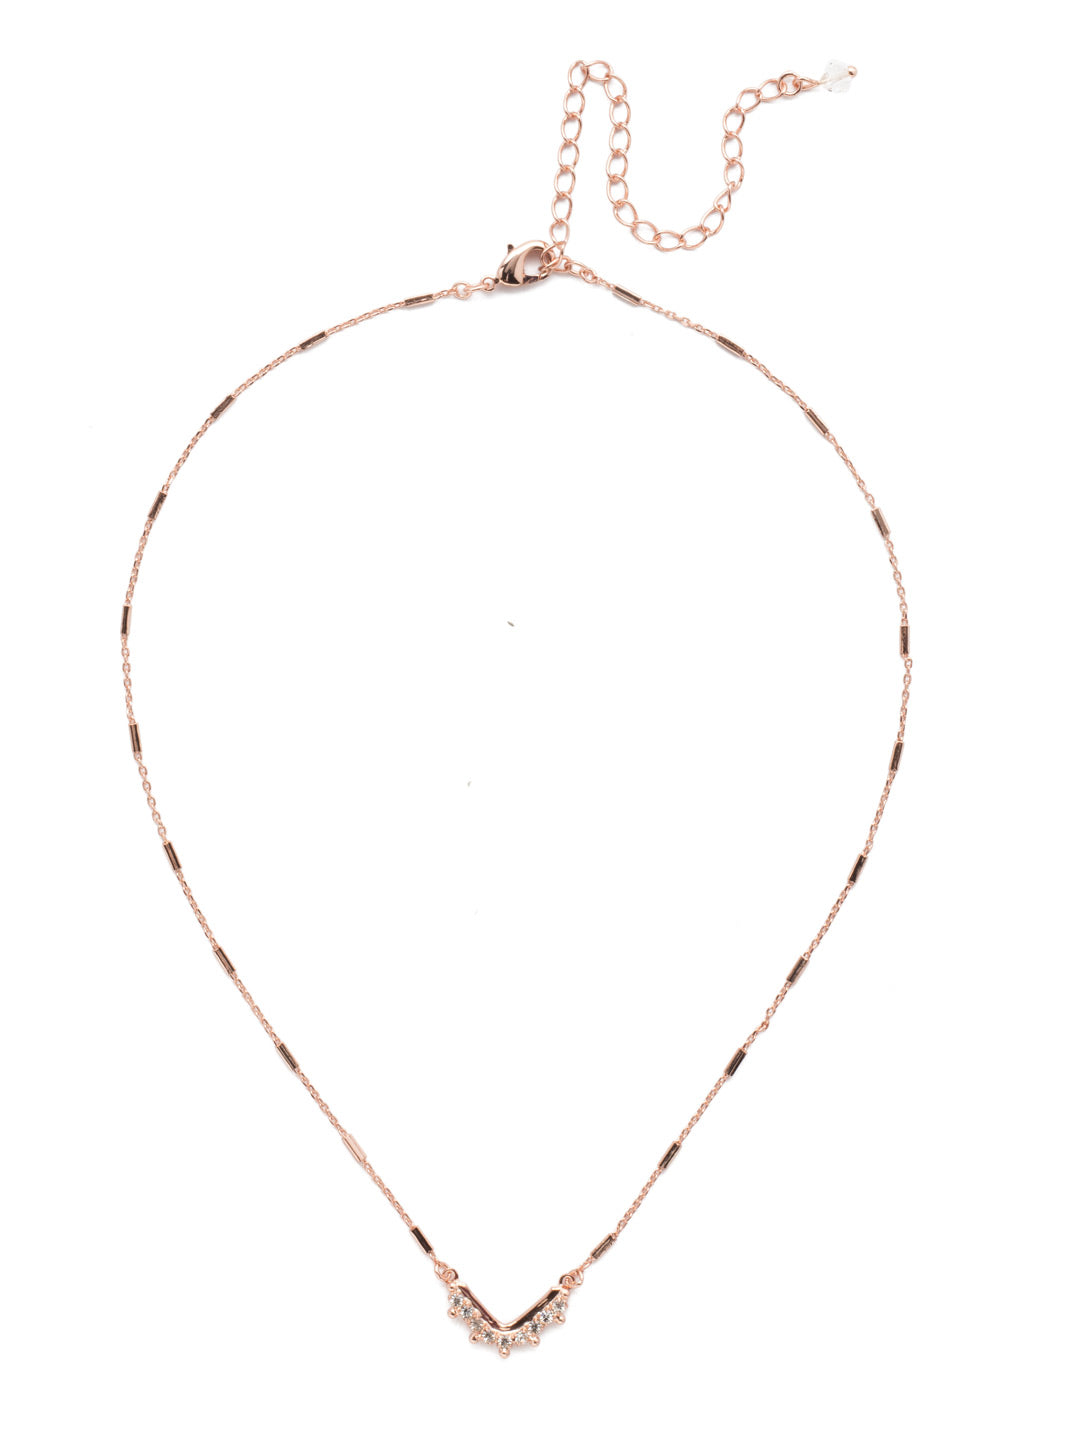 Jagged Pendant Necklace - NDW9RGCRY - <p>A small crystal-enveloped chevron combines with ball chain in this simple look. From Sorrelli's Crystal collection in our Rose Gold-tone finish.</p>